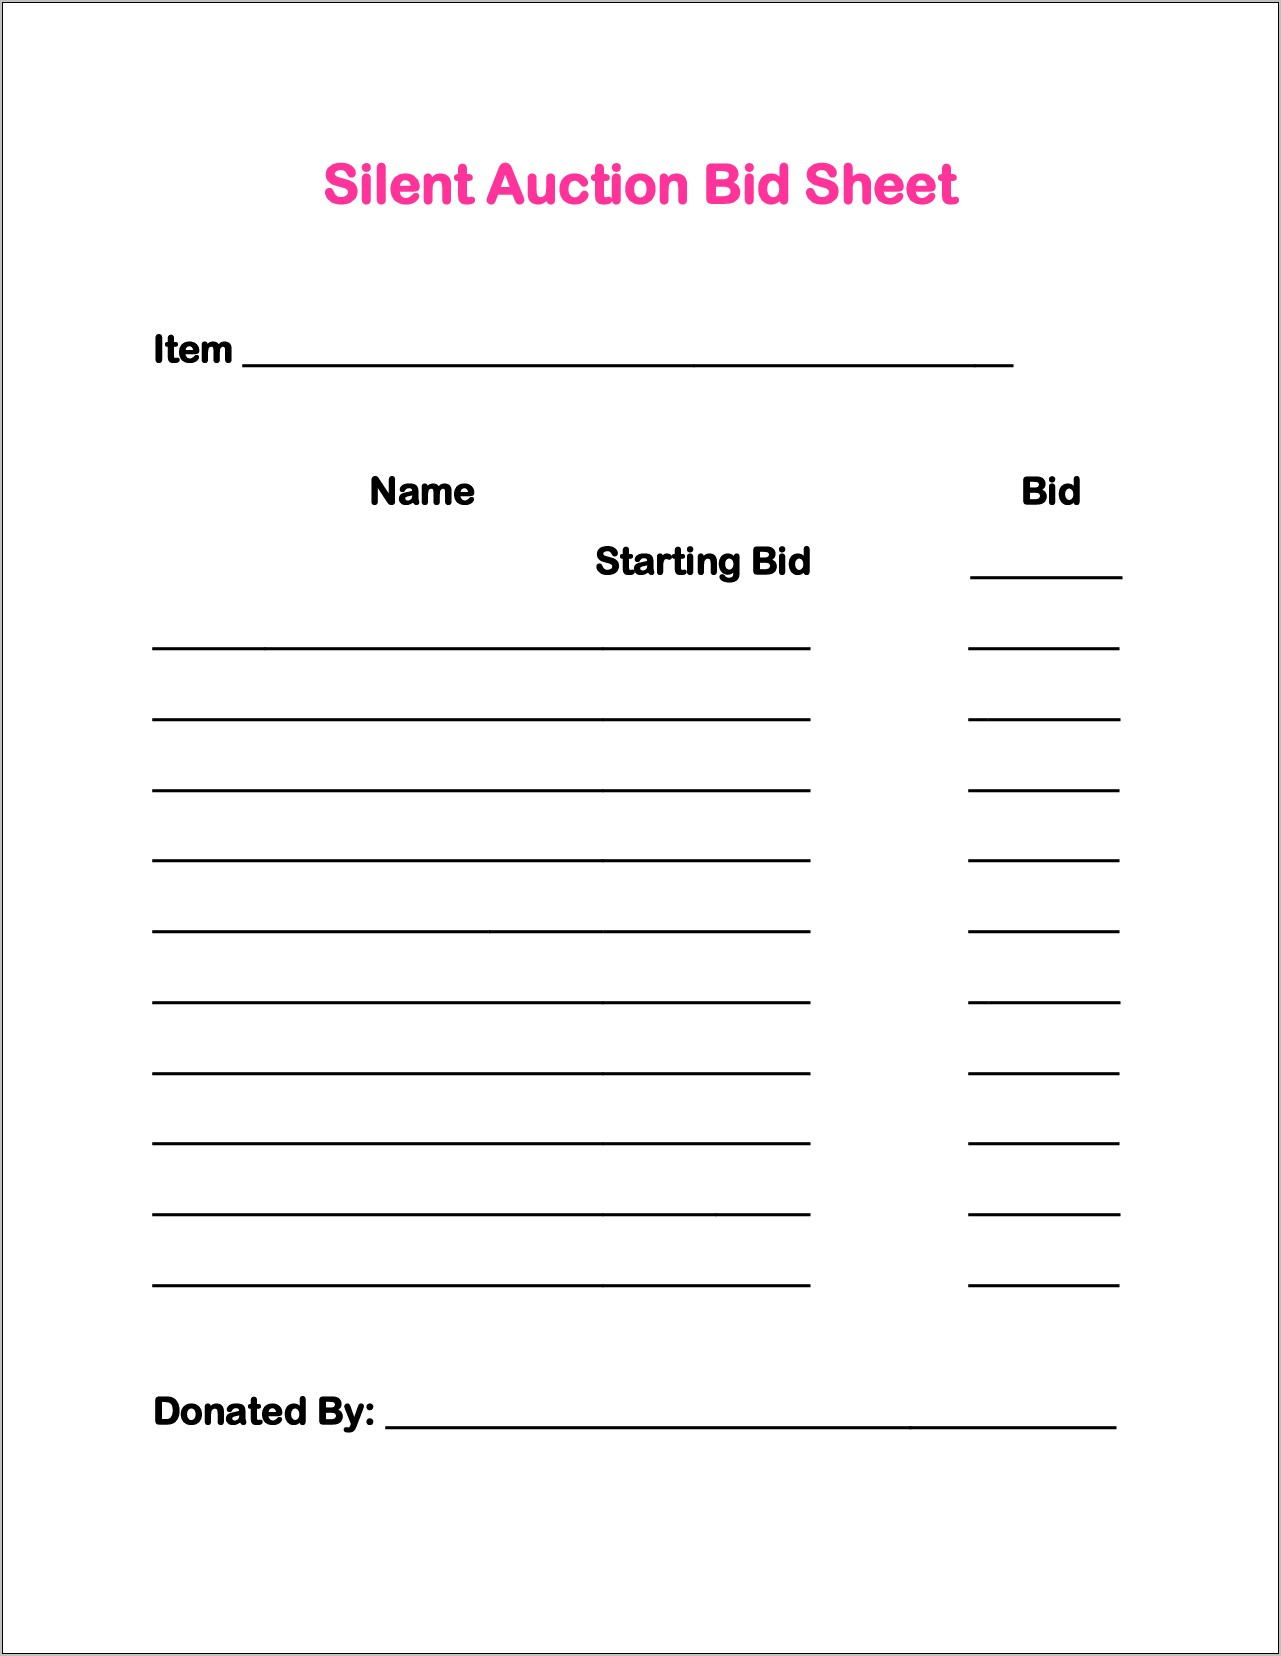 Silent Auction Sheet Template Free